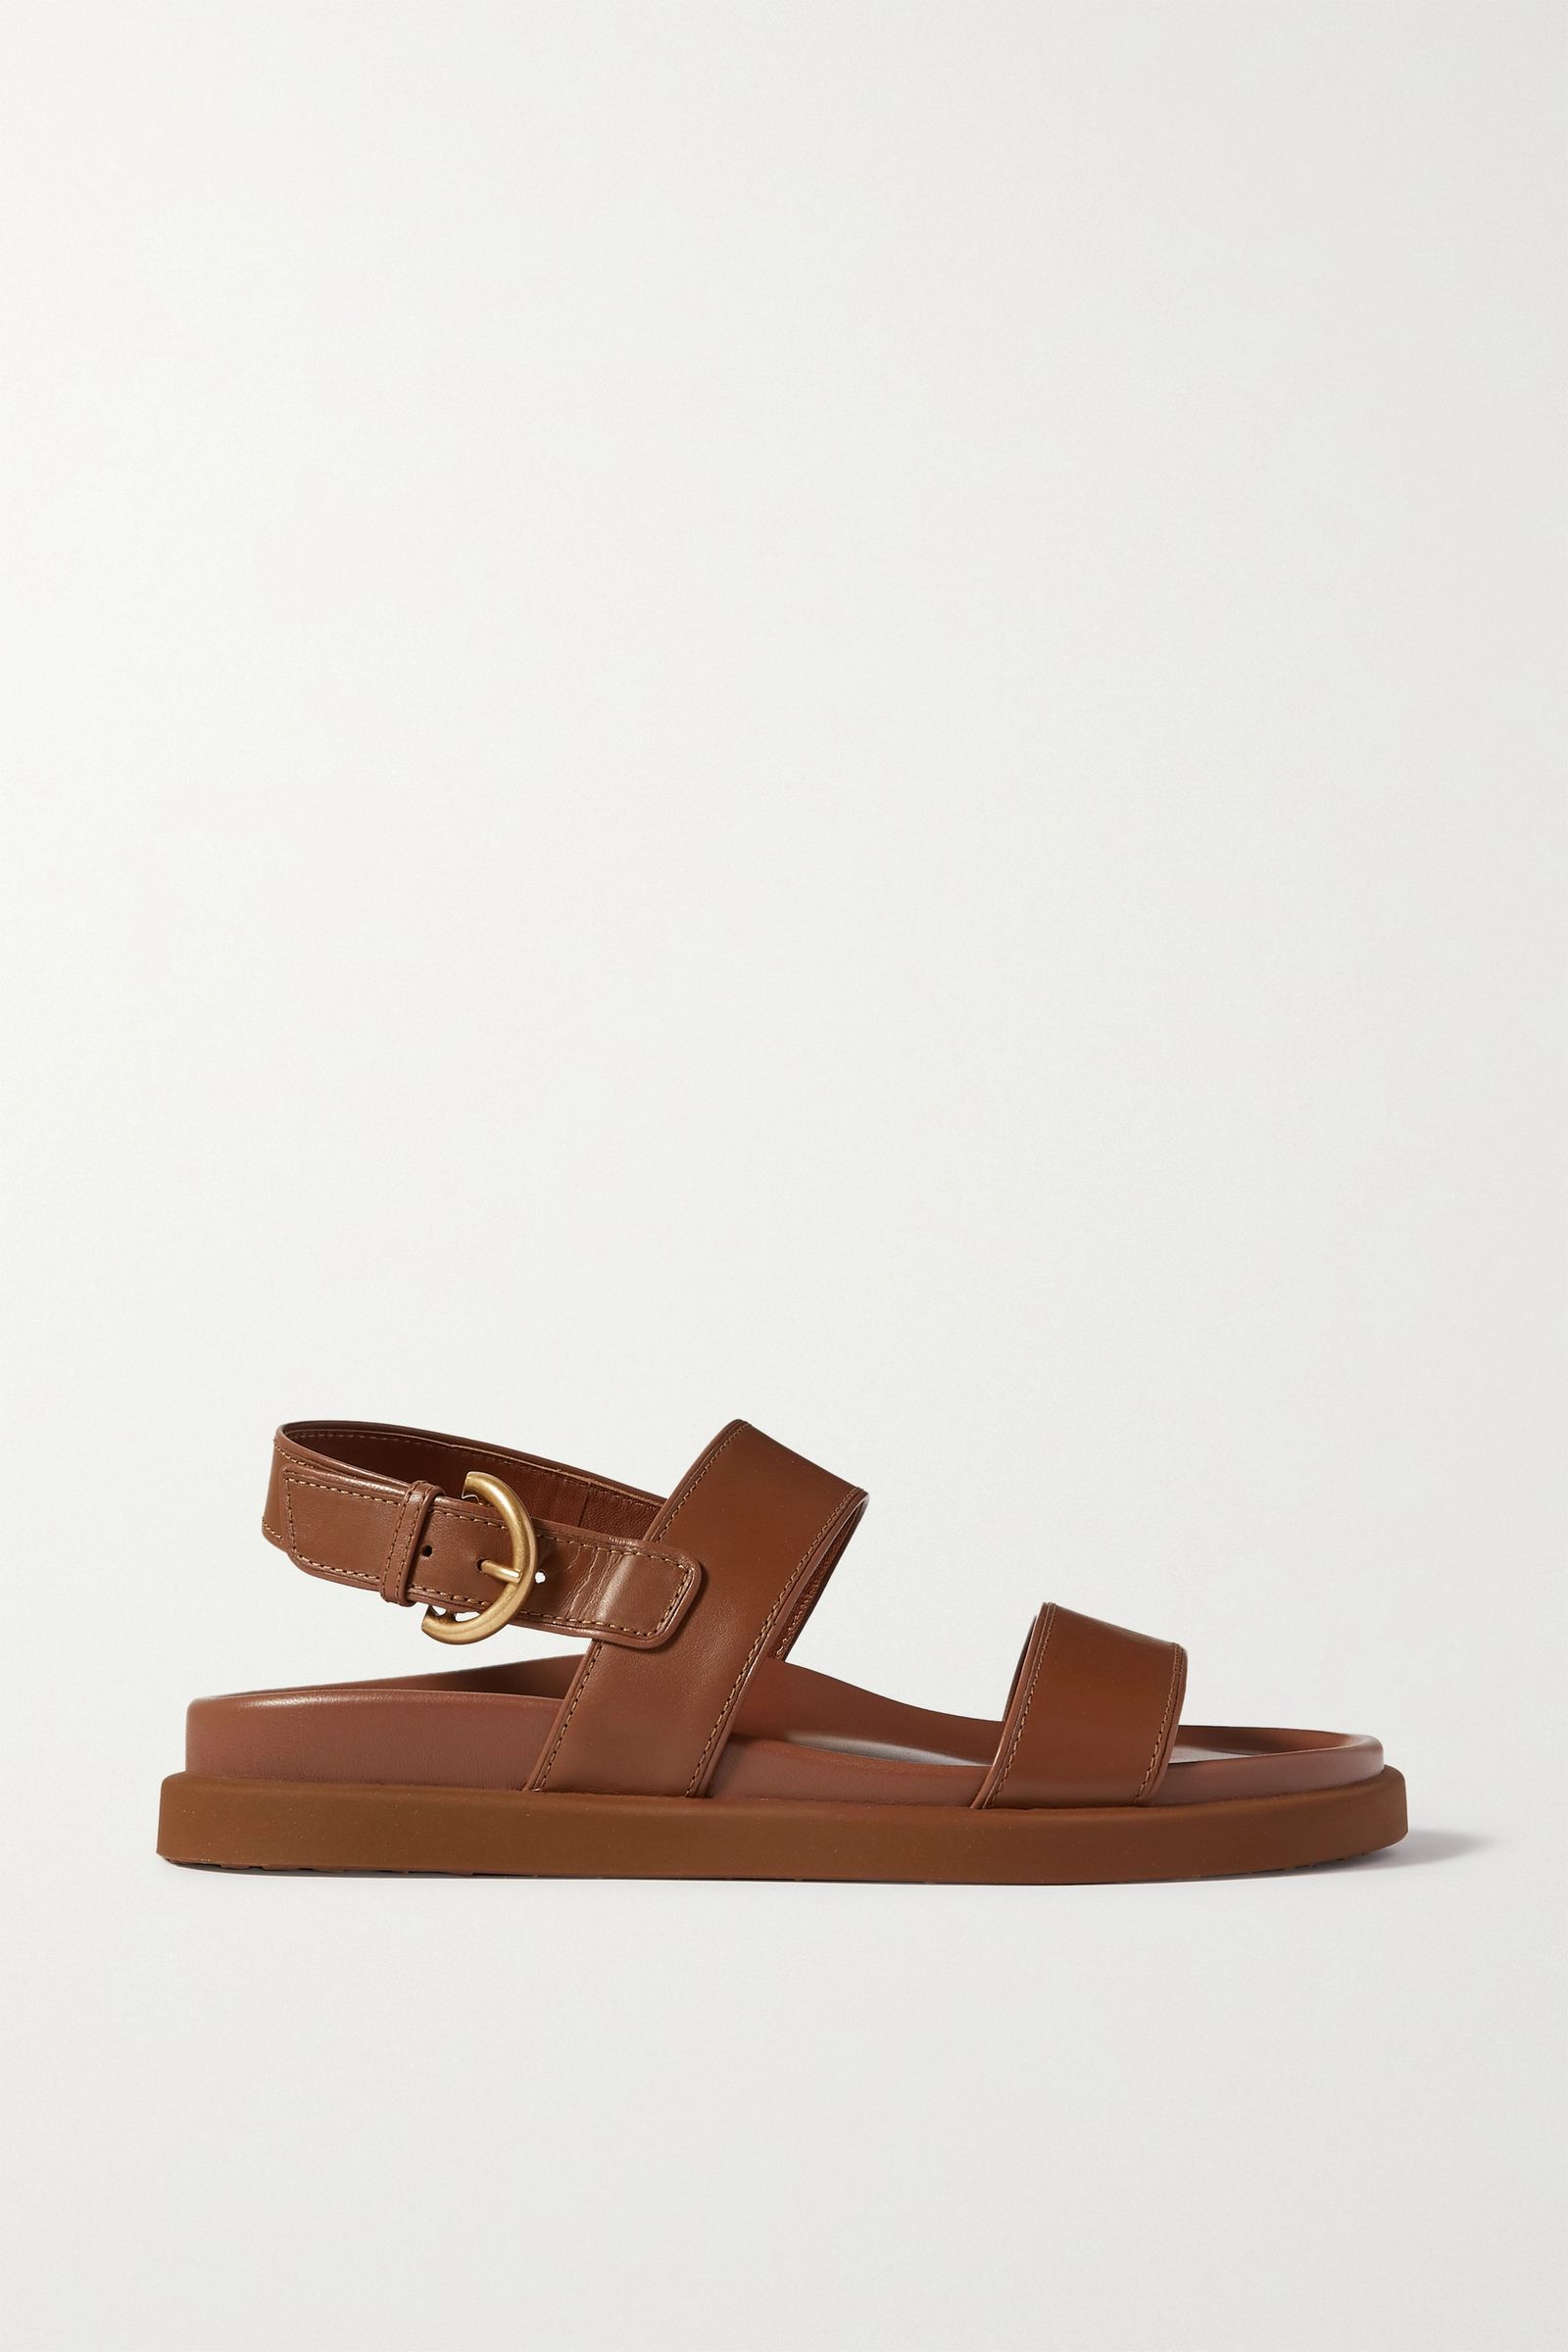 These Are the 25 Most Comfortable Sandals | Who What Wear